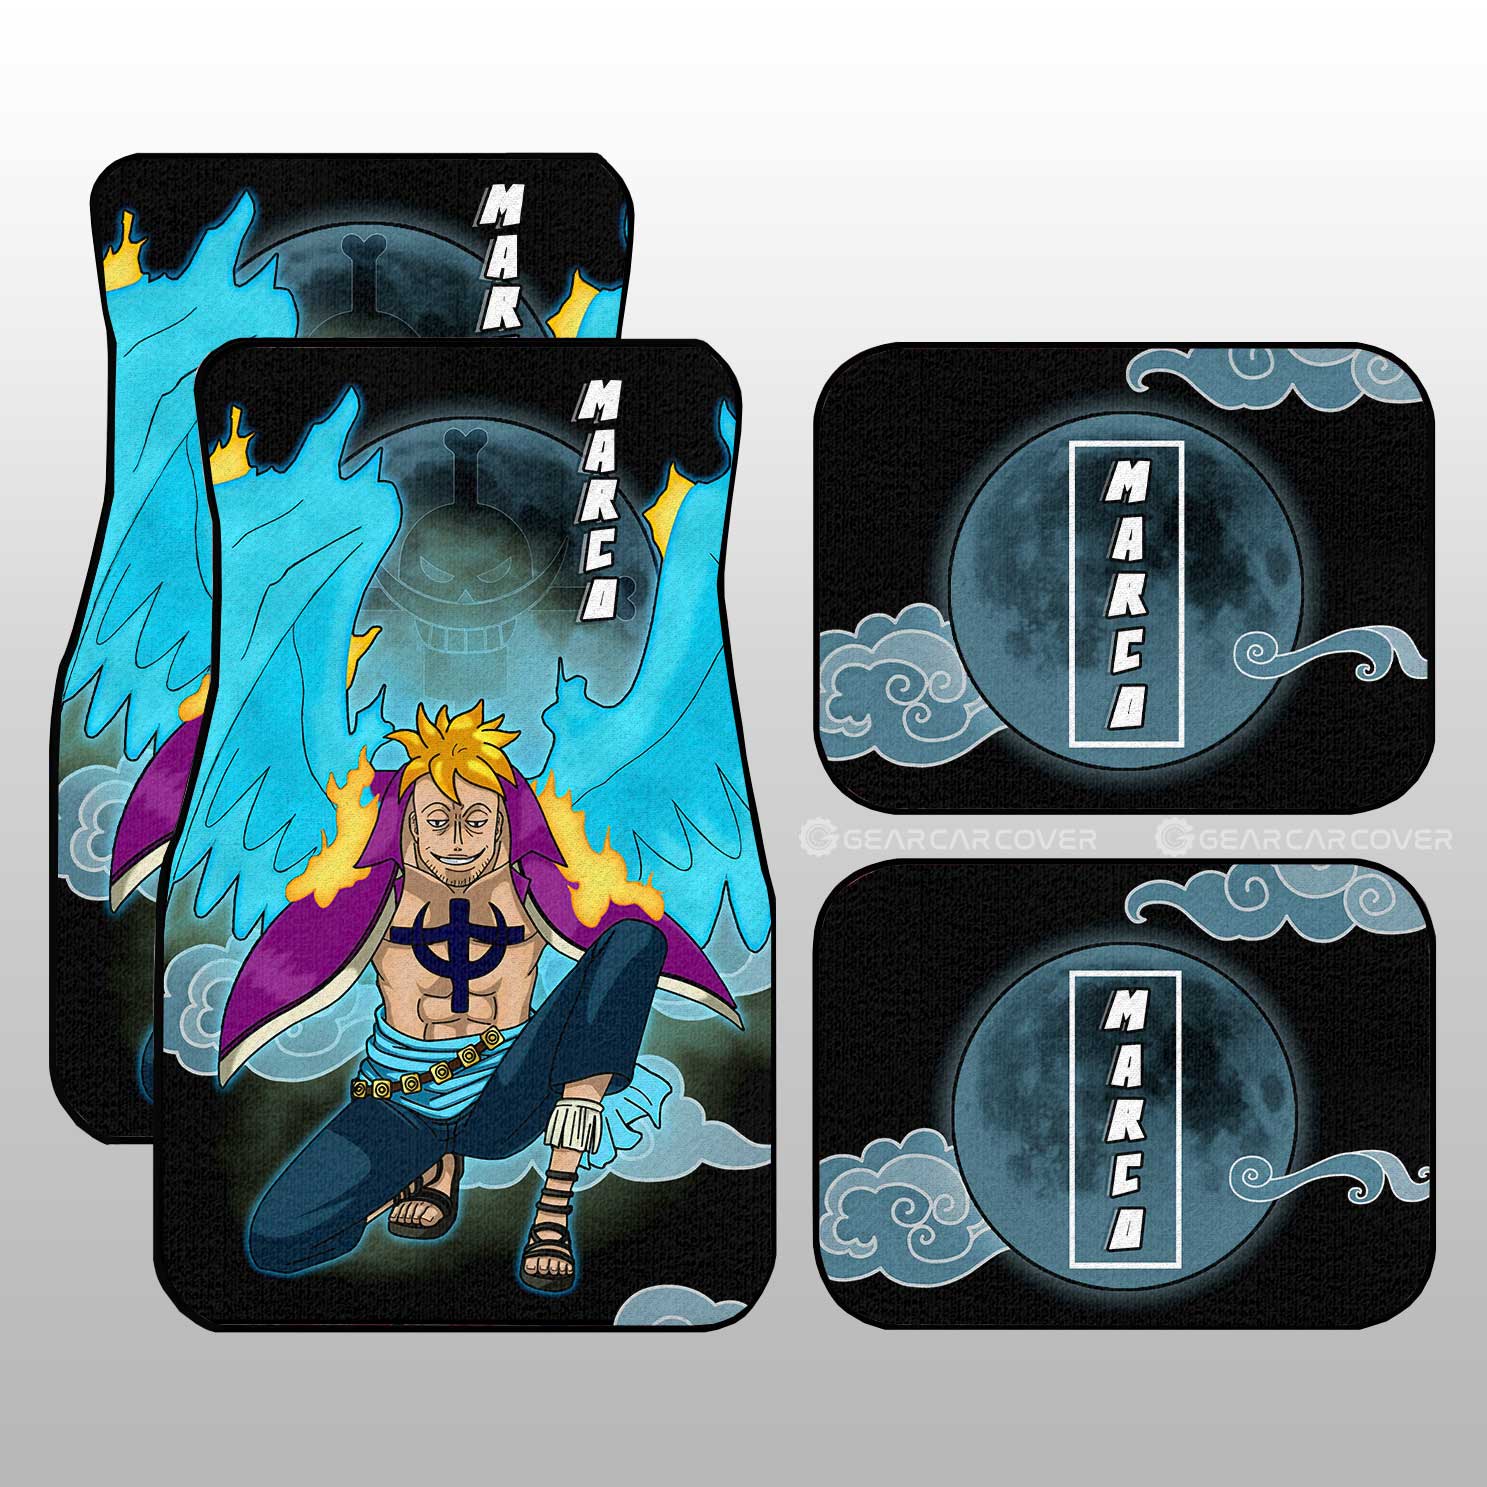 Marco Car Floor Mats Custom For One Piece Anime Fans - Gearcarcover - 1